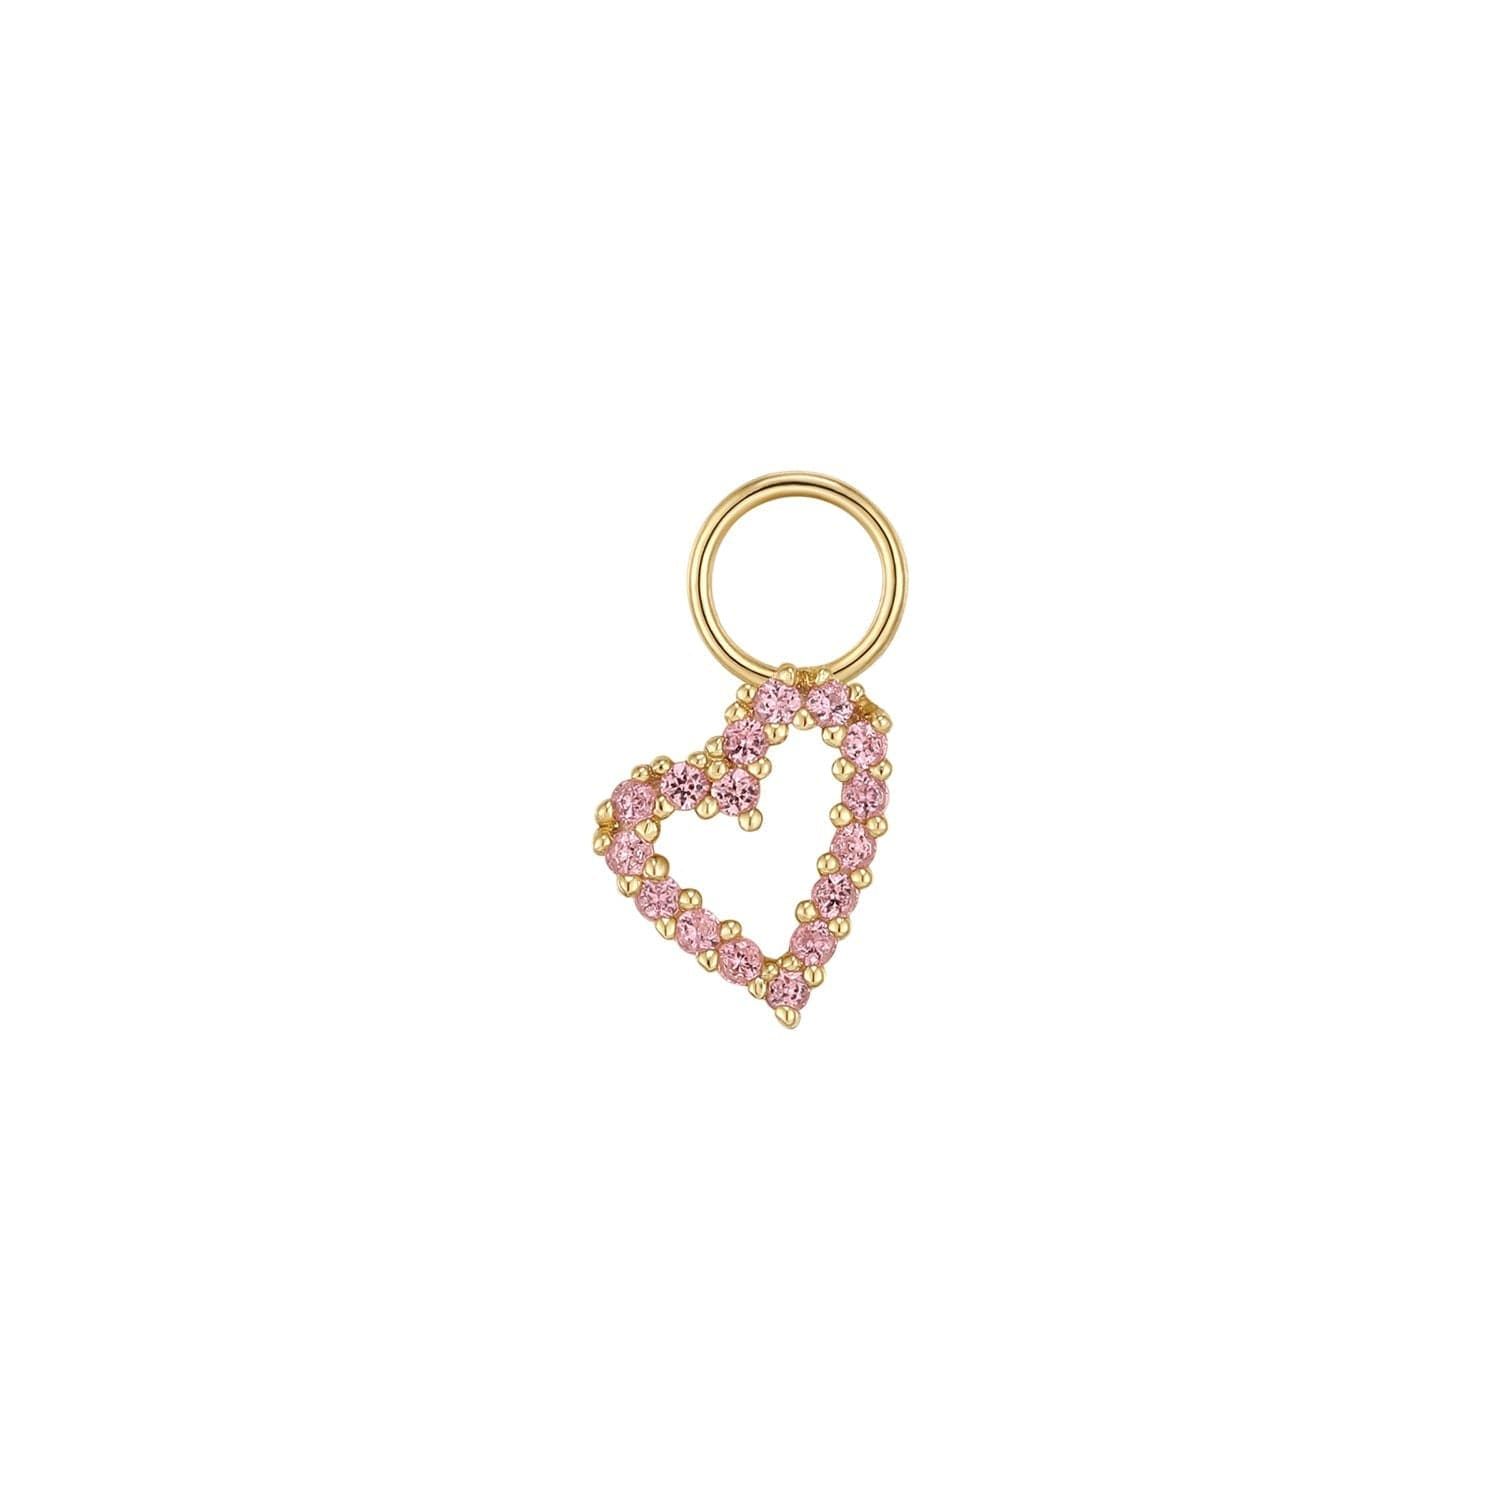 a heart shaped key chain with pink stones